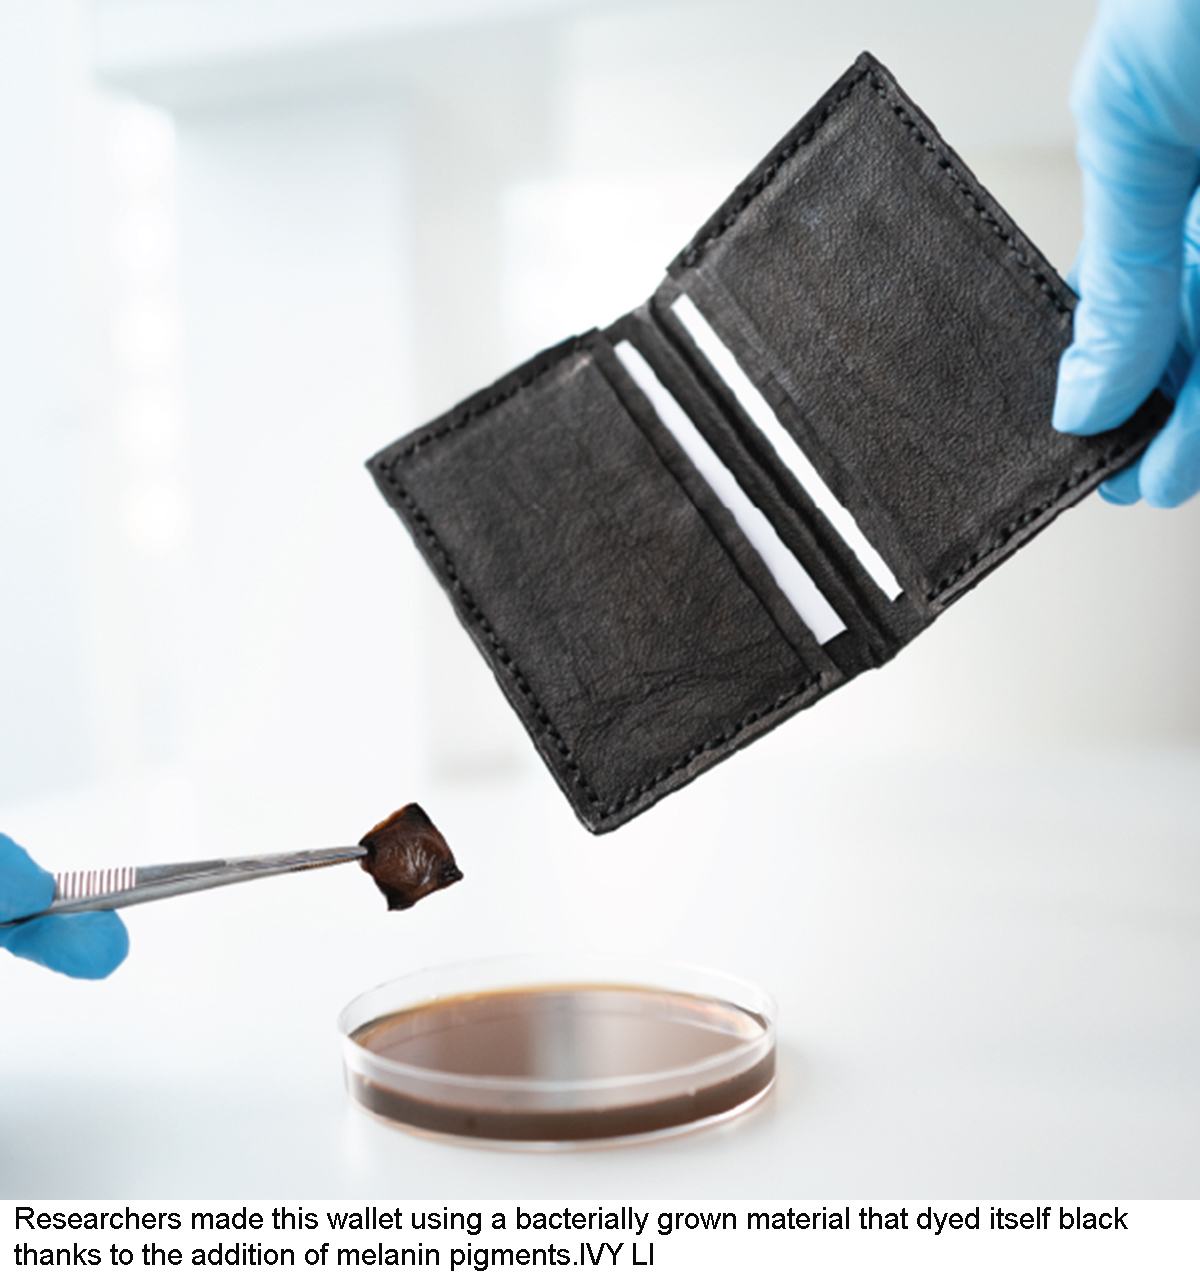 Bacteria is the new black: Scientists create microbes that make self-dyeing textiles